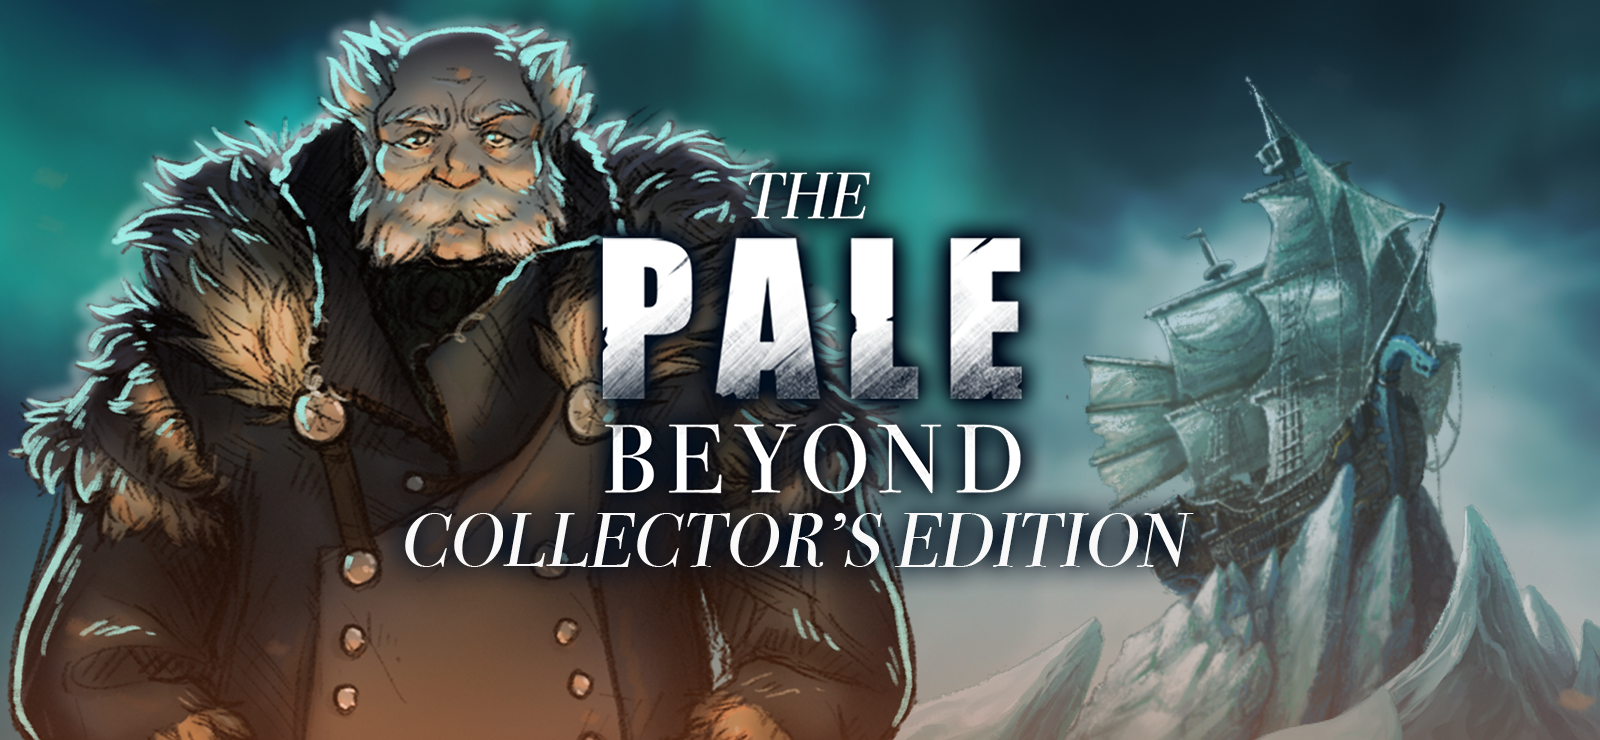 The Pale Beyond - Collectors Edition